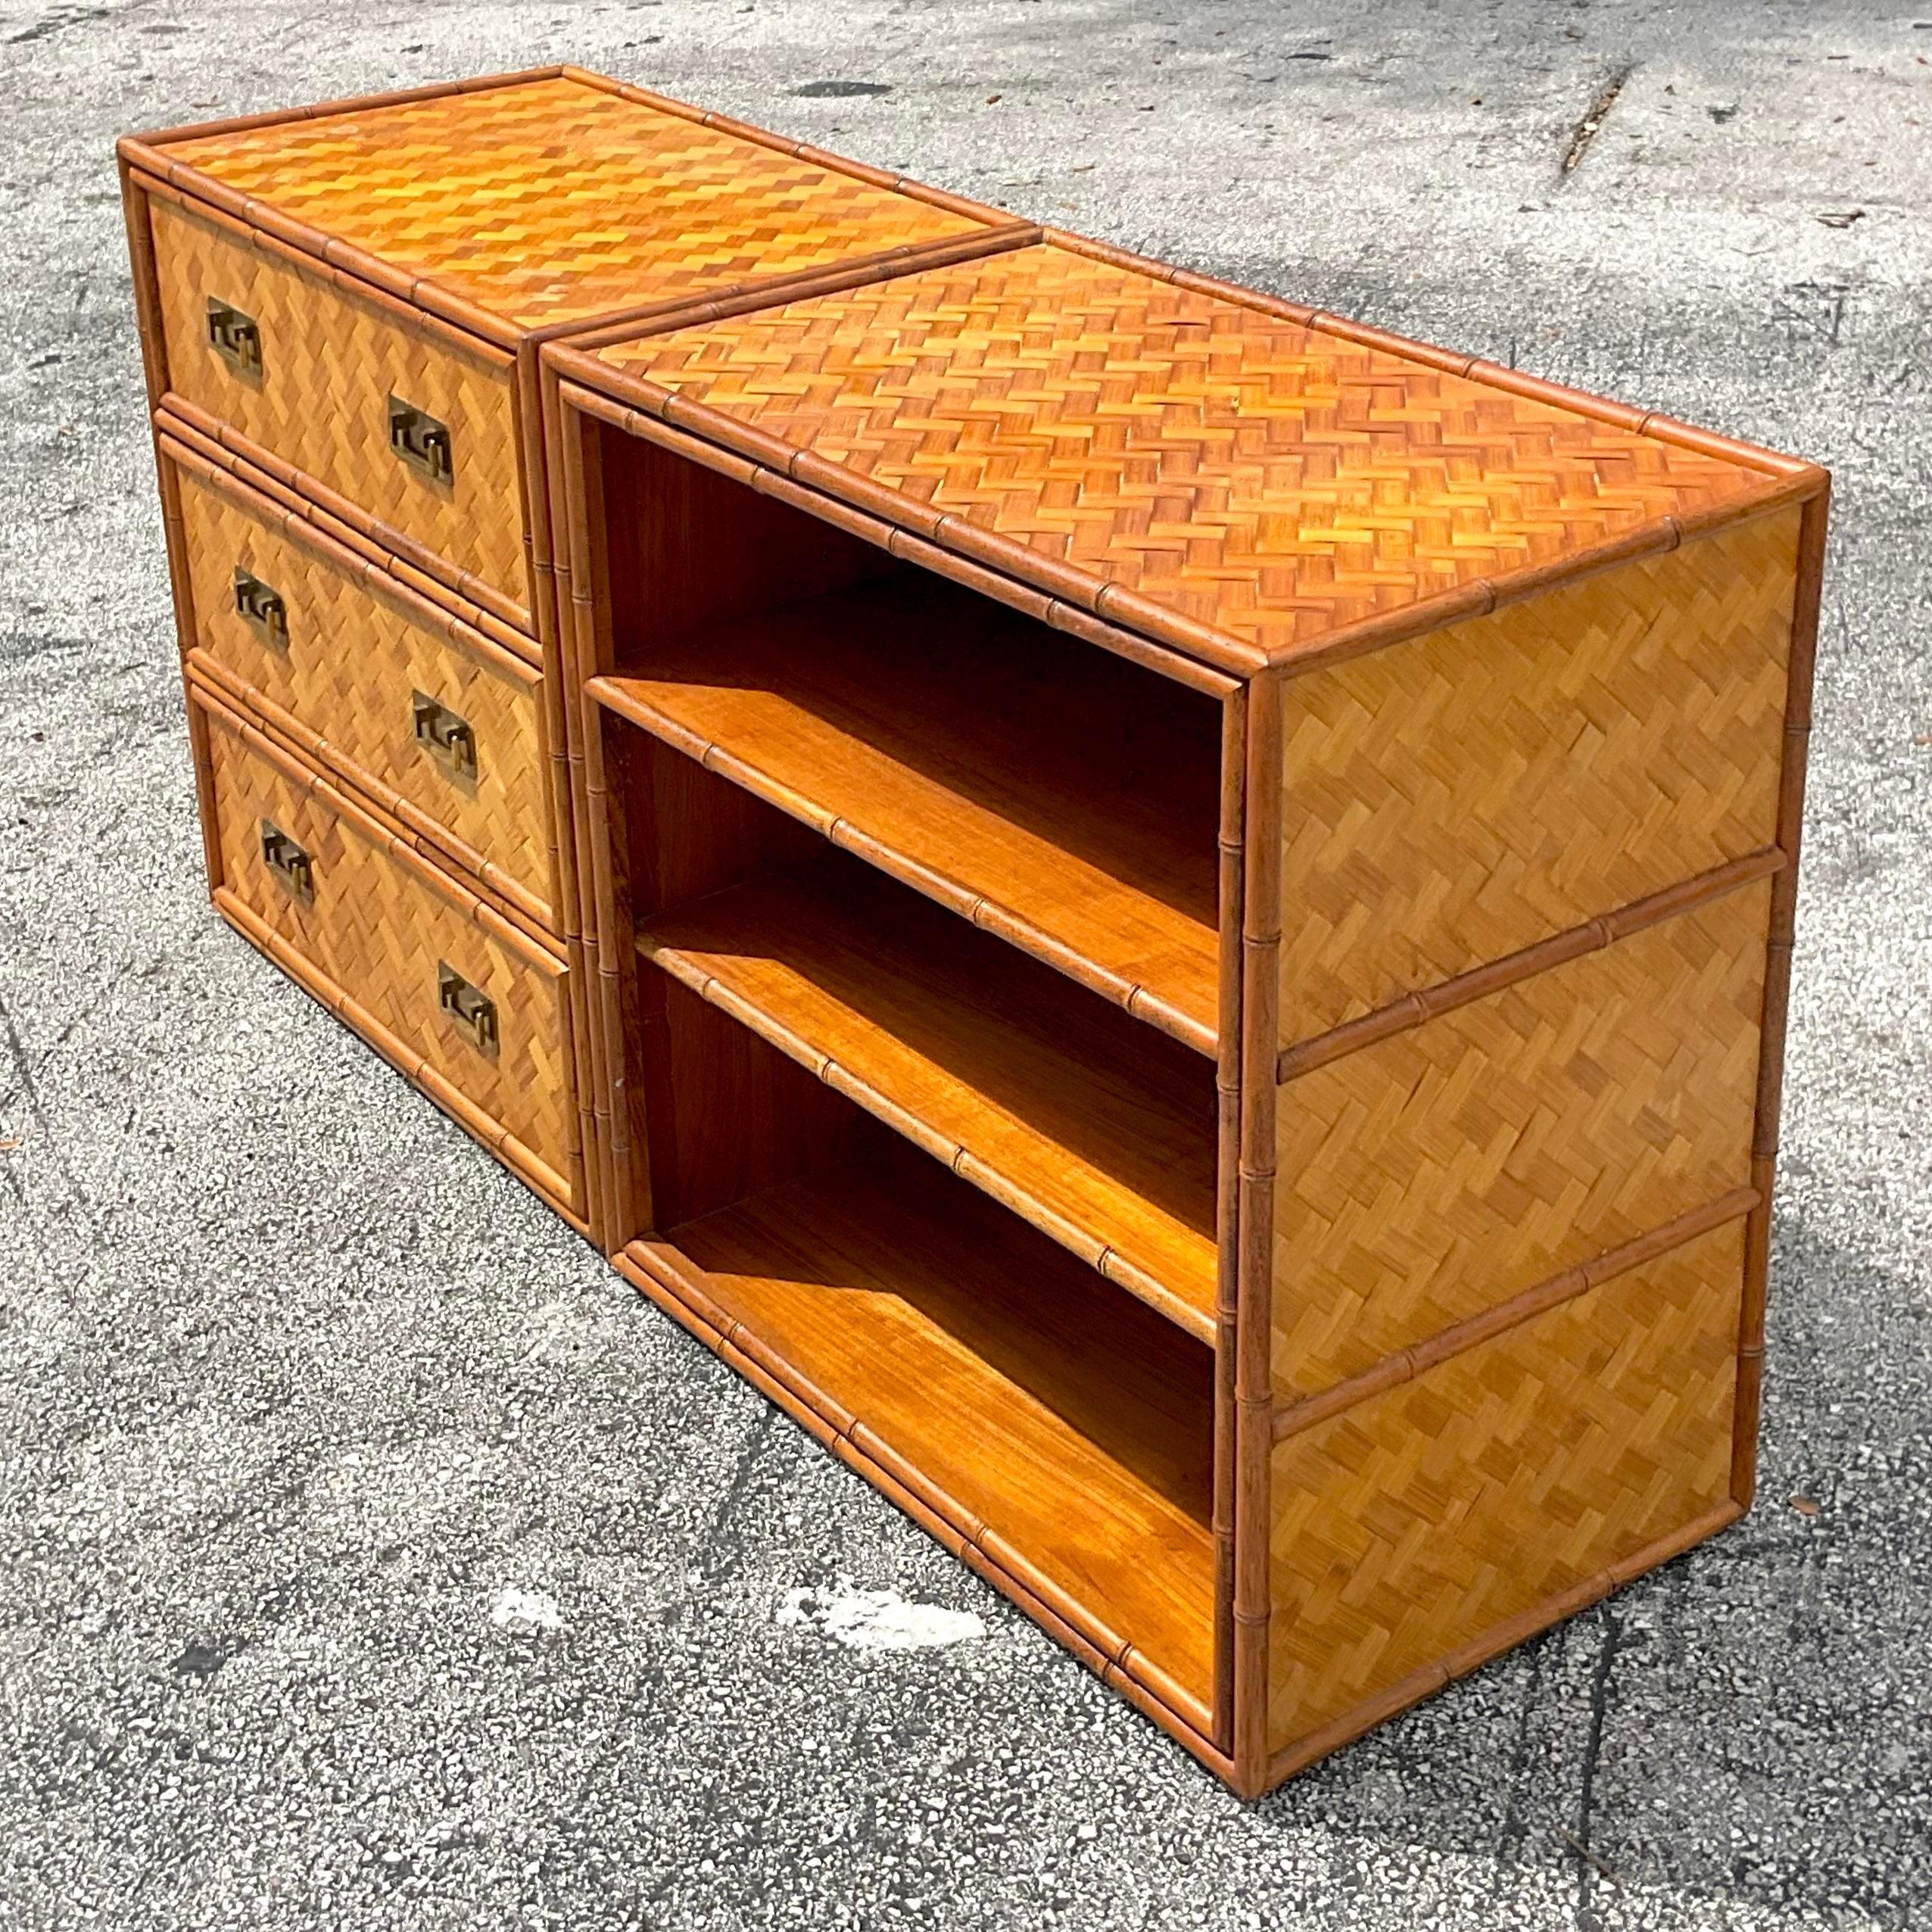 A sensational vintage Coastal credenza set. Two beautiful parquet rattan cabinets that are used together to create this credenza. Perfect together or separate to use as nightstands. You decide? Lots of great storage below. Acquired from a Palm Beach